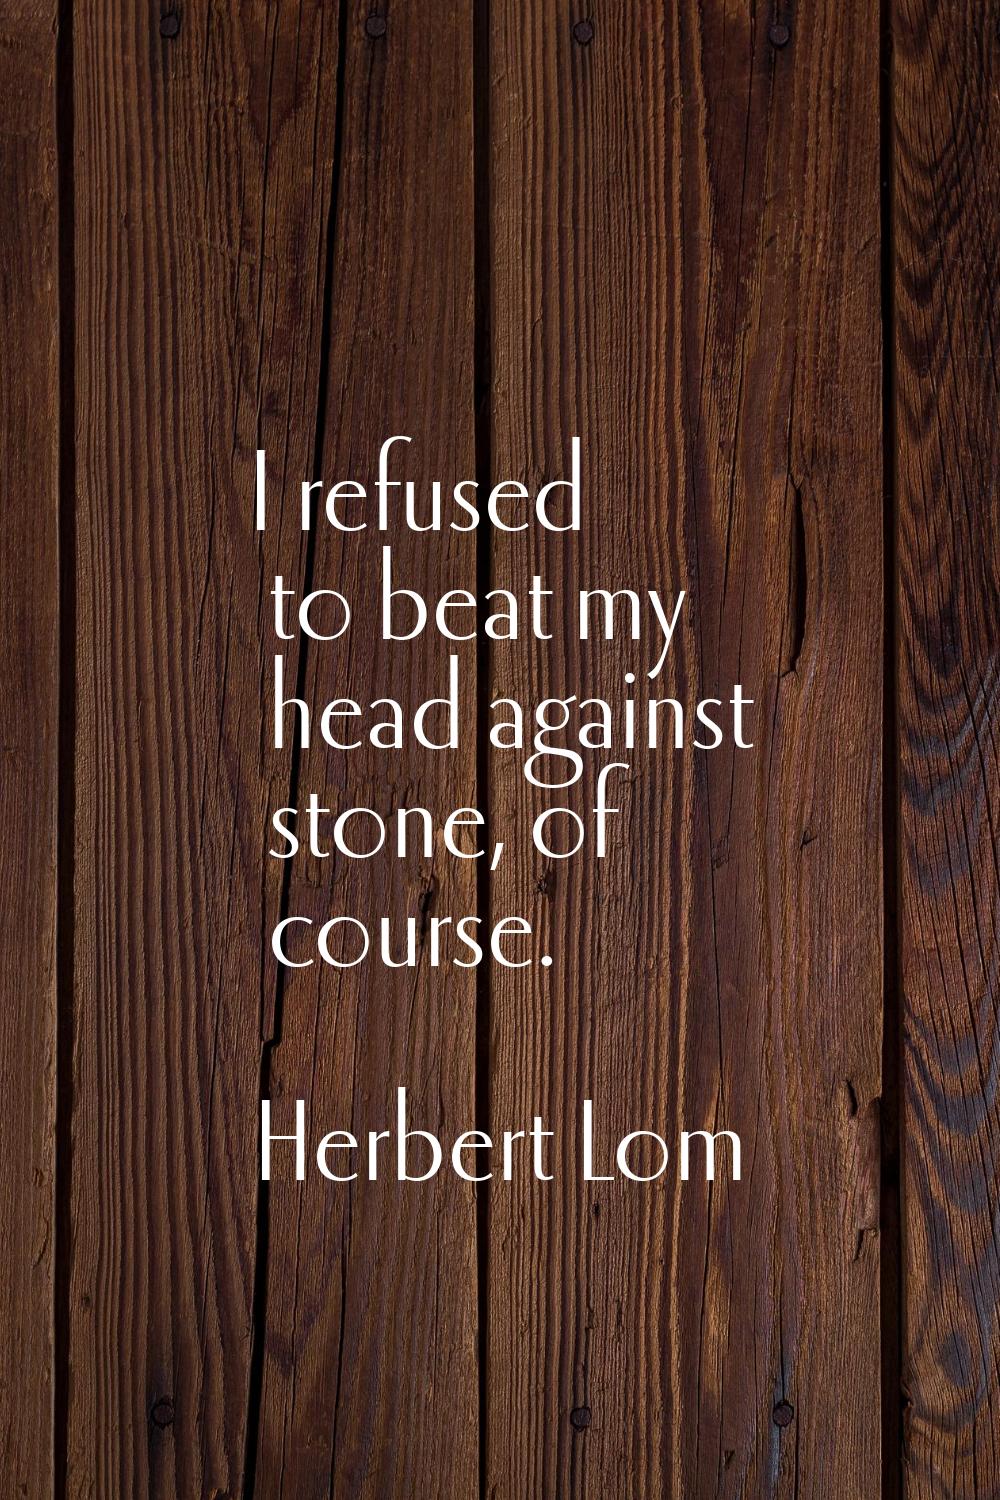 I refused to beat my head against stone, of course.